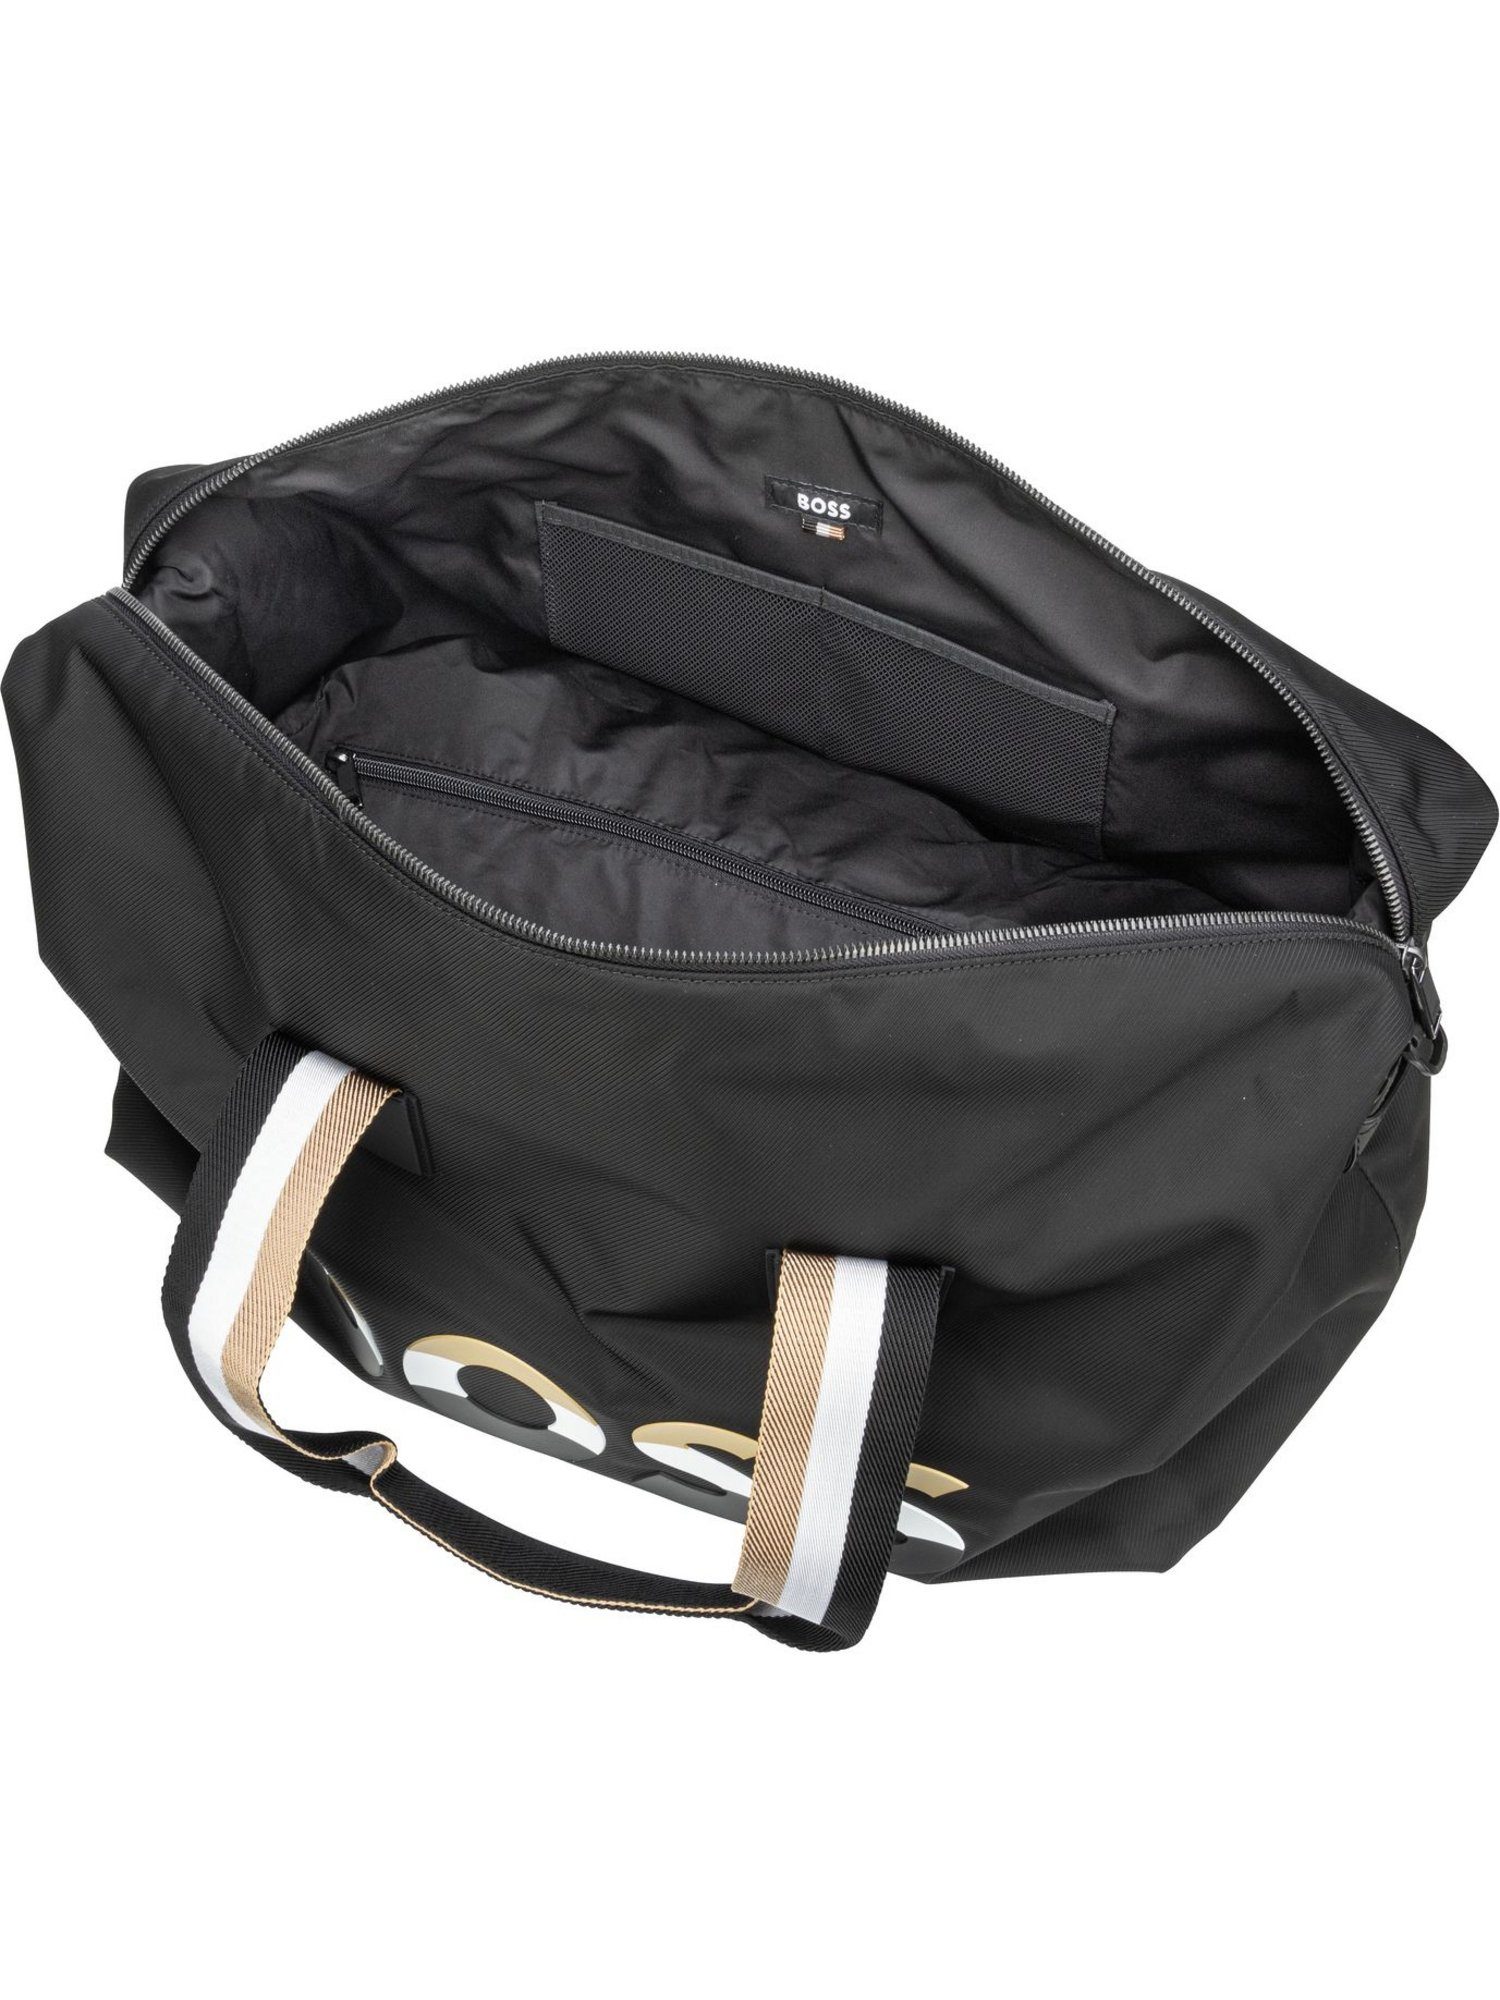 Catch Holdall 2.0I Weekender BOSS